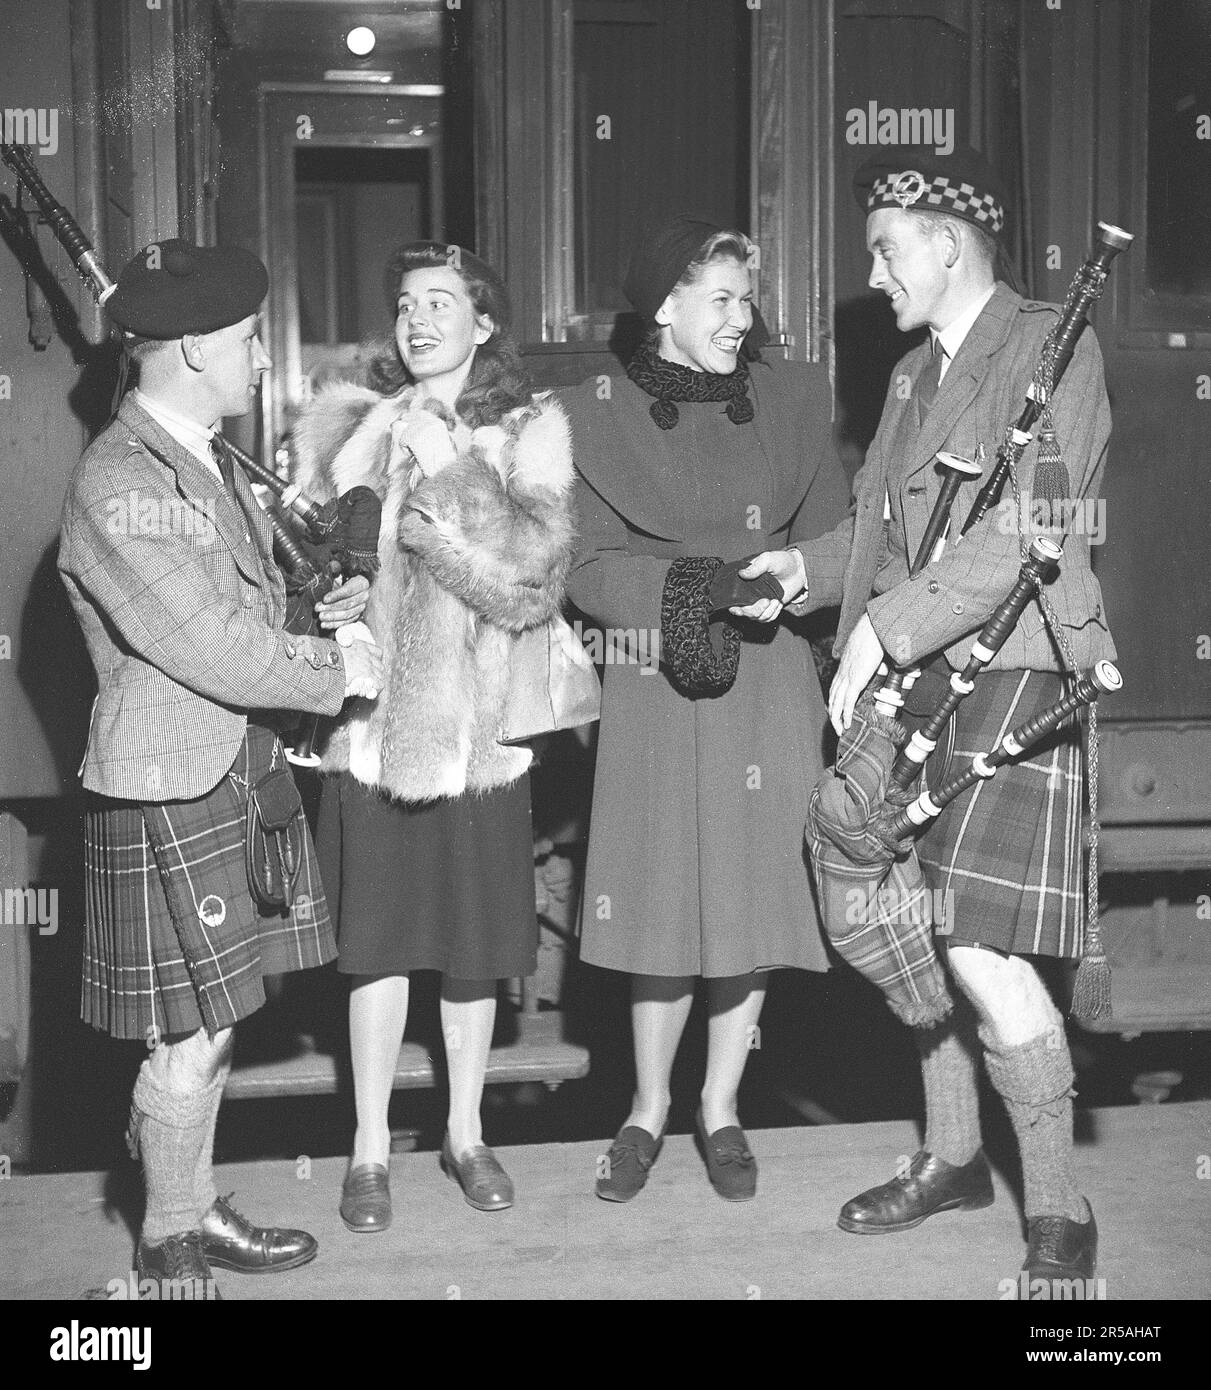 Young women happily greet musicians from Scotland, dressed in traditional kilts with bagpipes. It is Agneta Lagerfelt and Ingrid Eksell from the Oscarsteatern in Stockholm who welcome Donald MacLean and John MacFadyen who will participate in the stage set of Brigadoon.  Pipe Major Donald Maclean, Seaforth Highlanders, was a noted piper and composer during the mid-20th century. He won both Gold Medals (Oban, 1951, MacDonald’s Salute, and Inverness, 1953, Black Donald’s March), and was renowned as a performer of light music.  John MacFadyen was born in Glasgow in 1926 to island parents.   John w Stock Photo